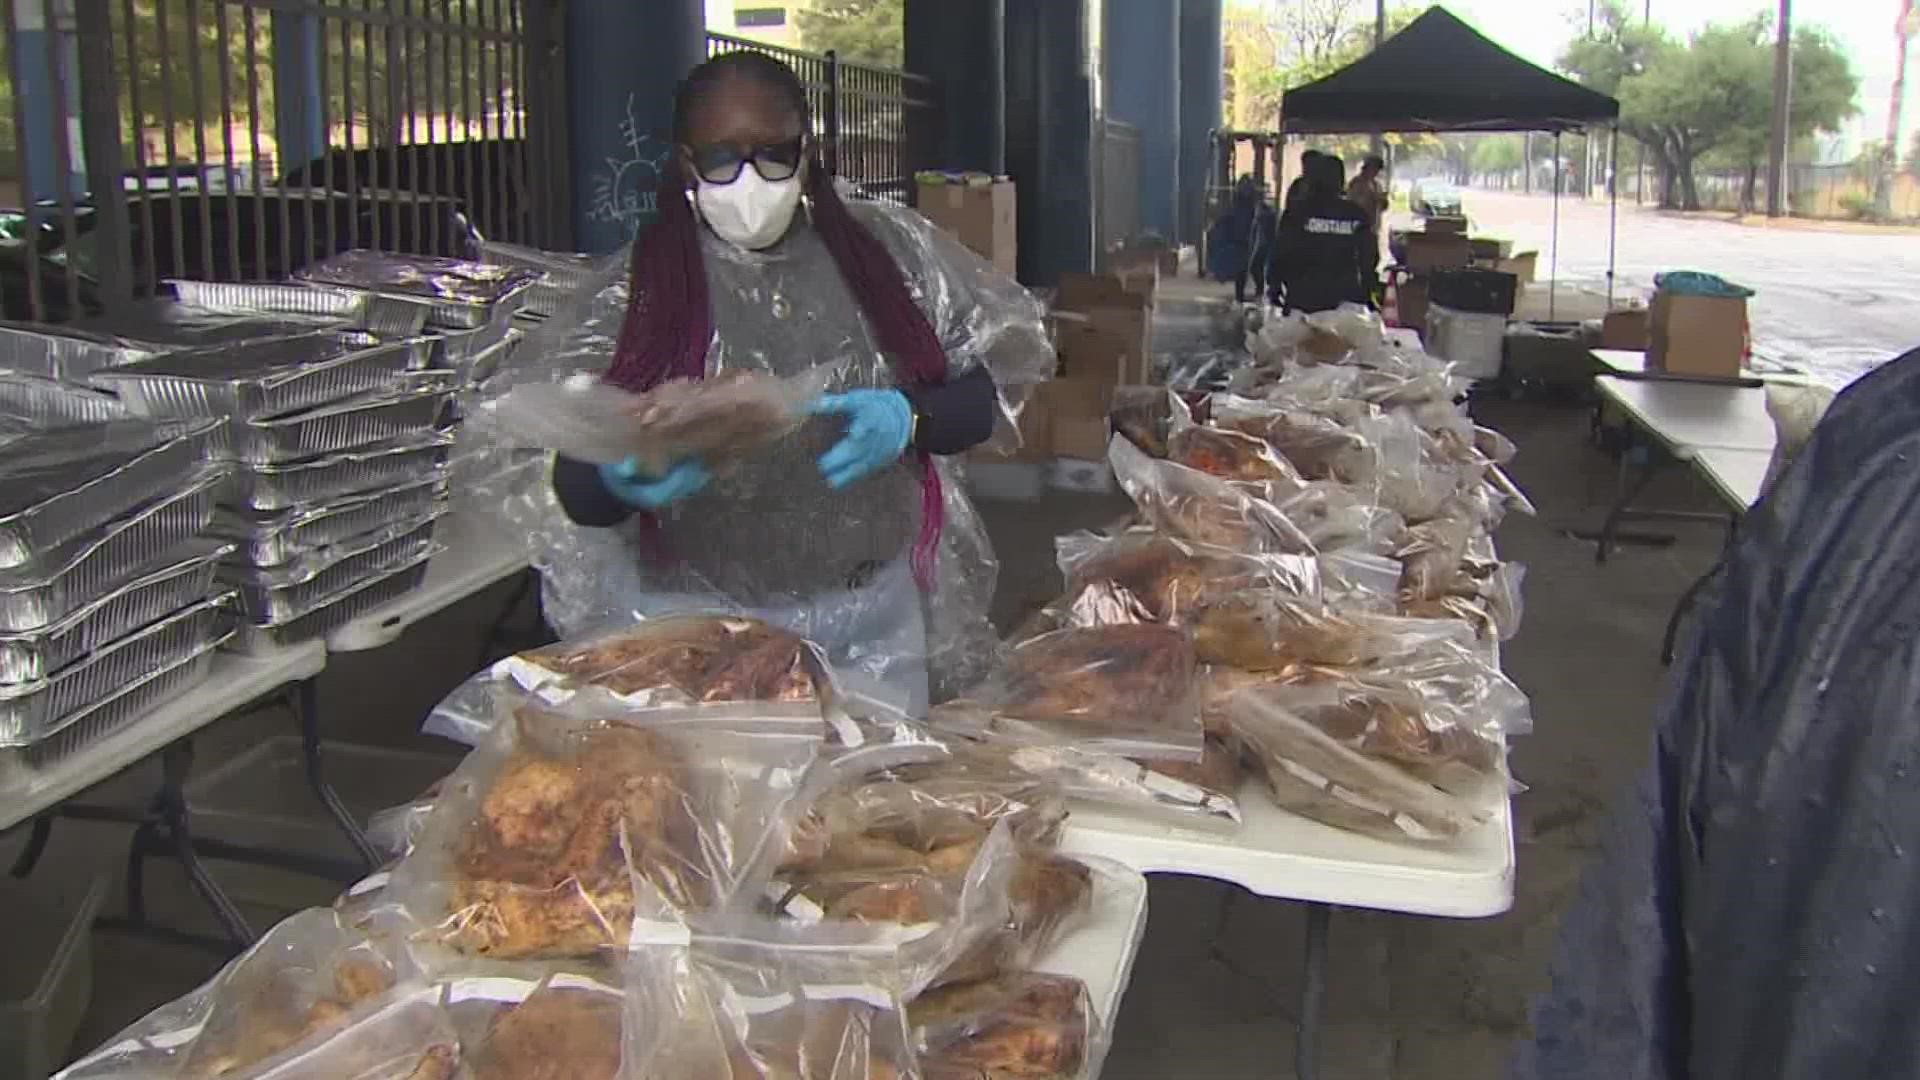 The drive-thru event hosted by Bread of Life, Inc. served thousands of families in need.